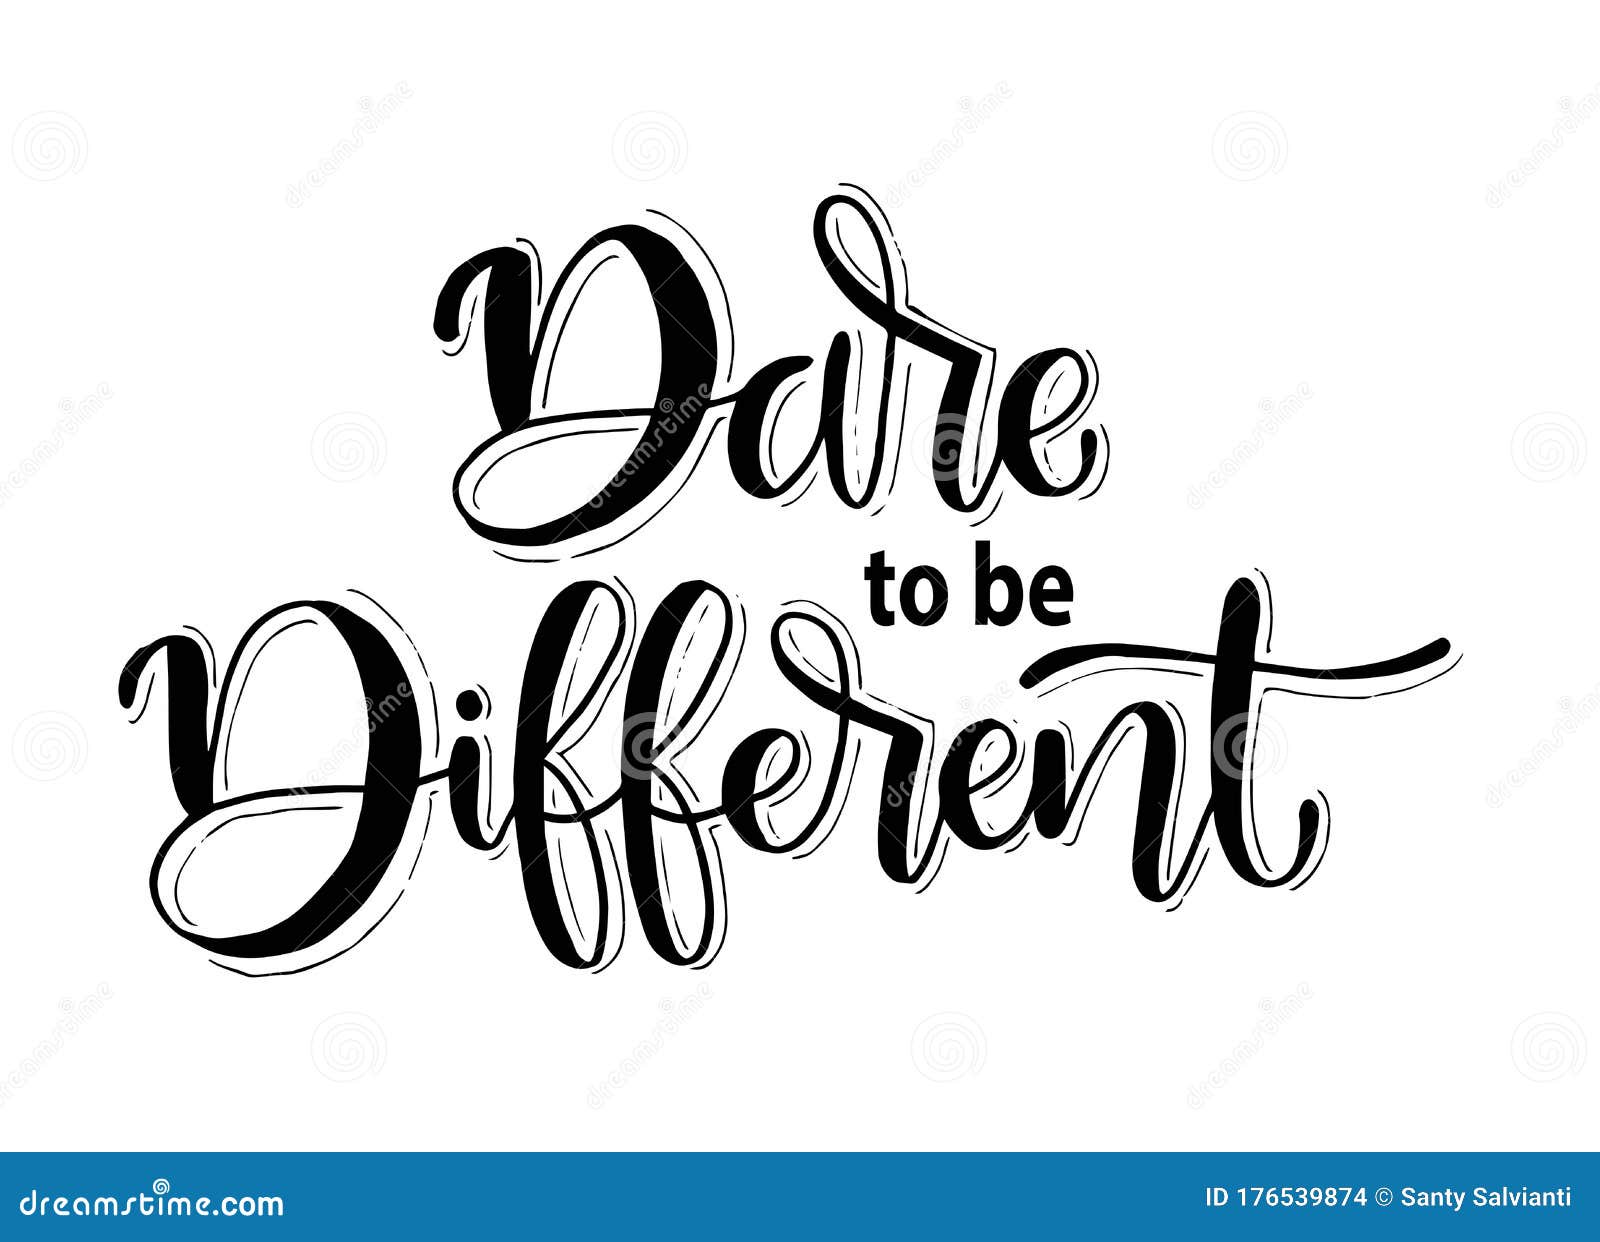 dare to be different. hand lettering inscription text, motivation and inspiration positive quote